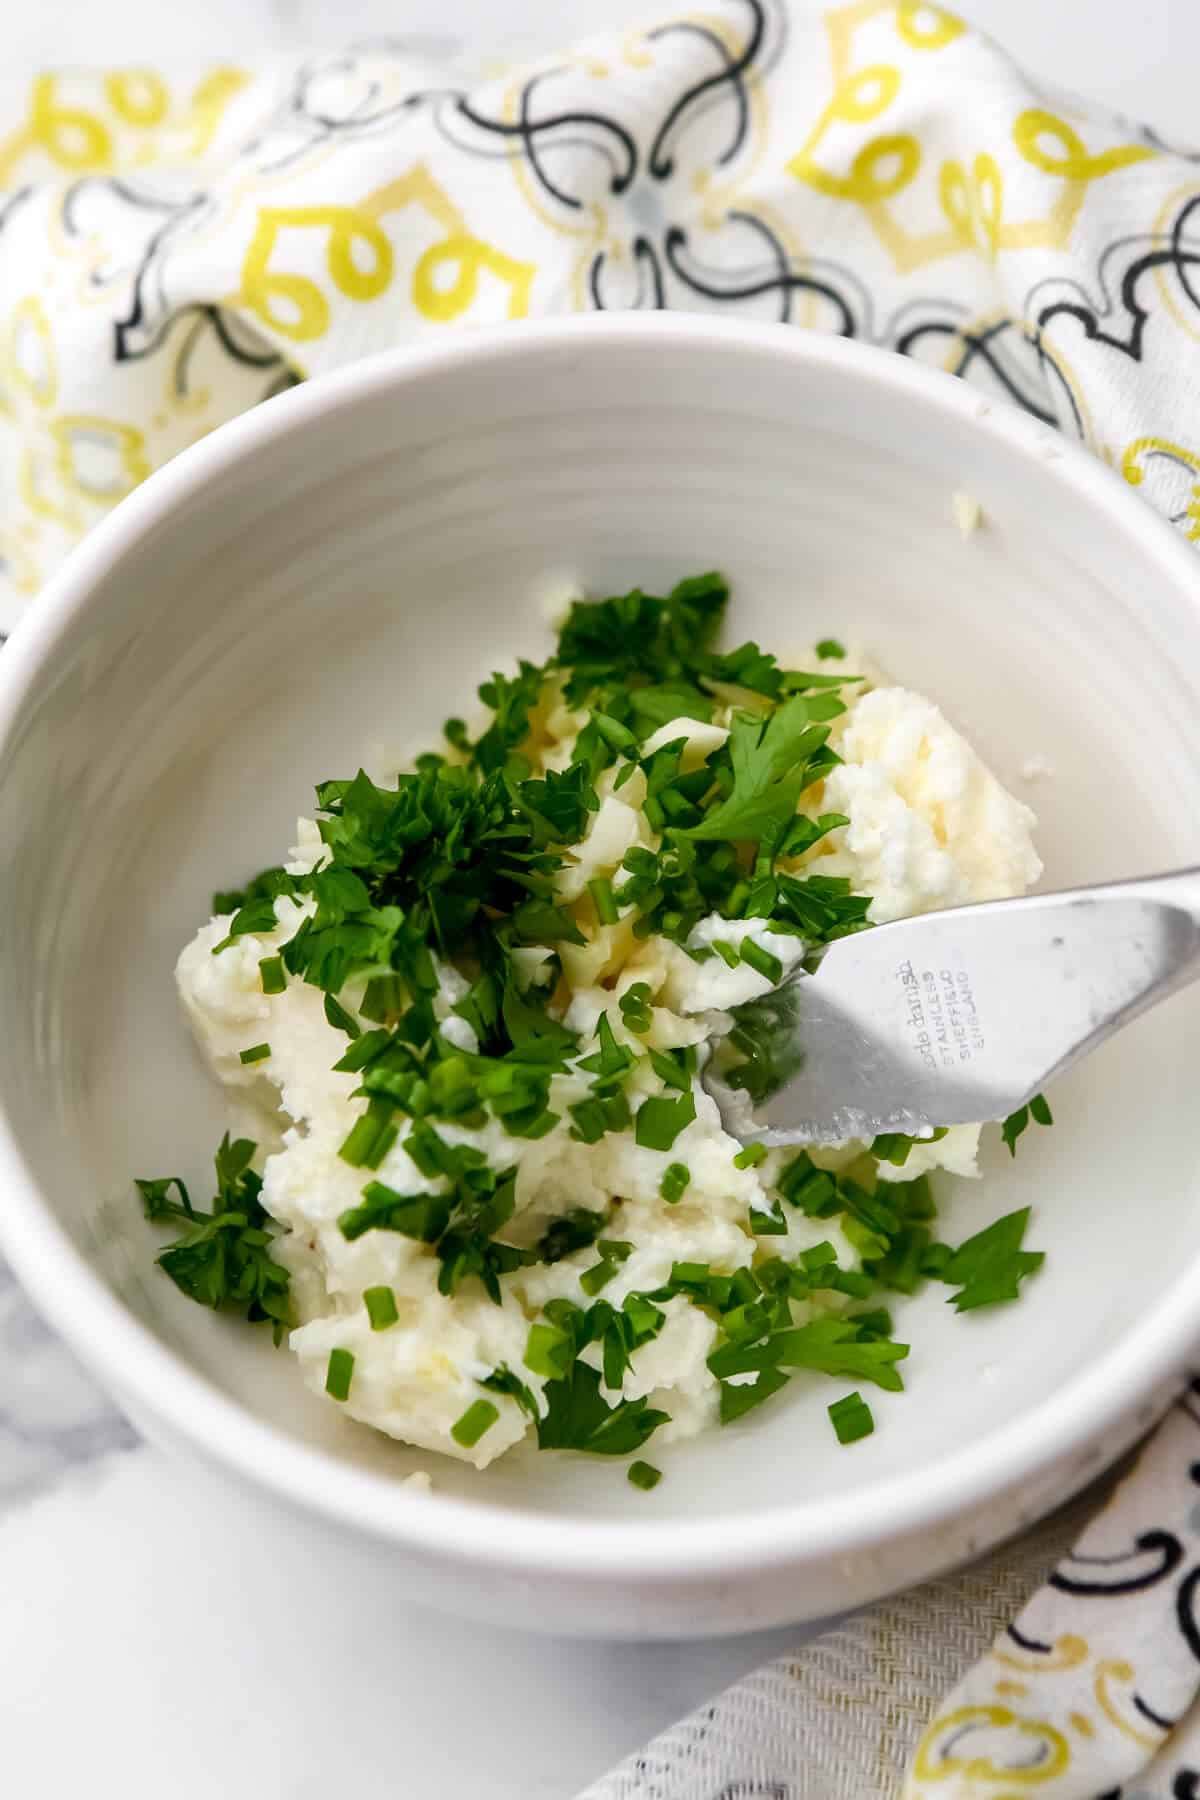 Vegan butter with mined garlic and fresh herbs in a white bowl.